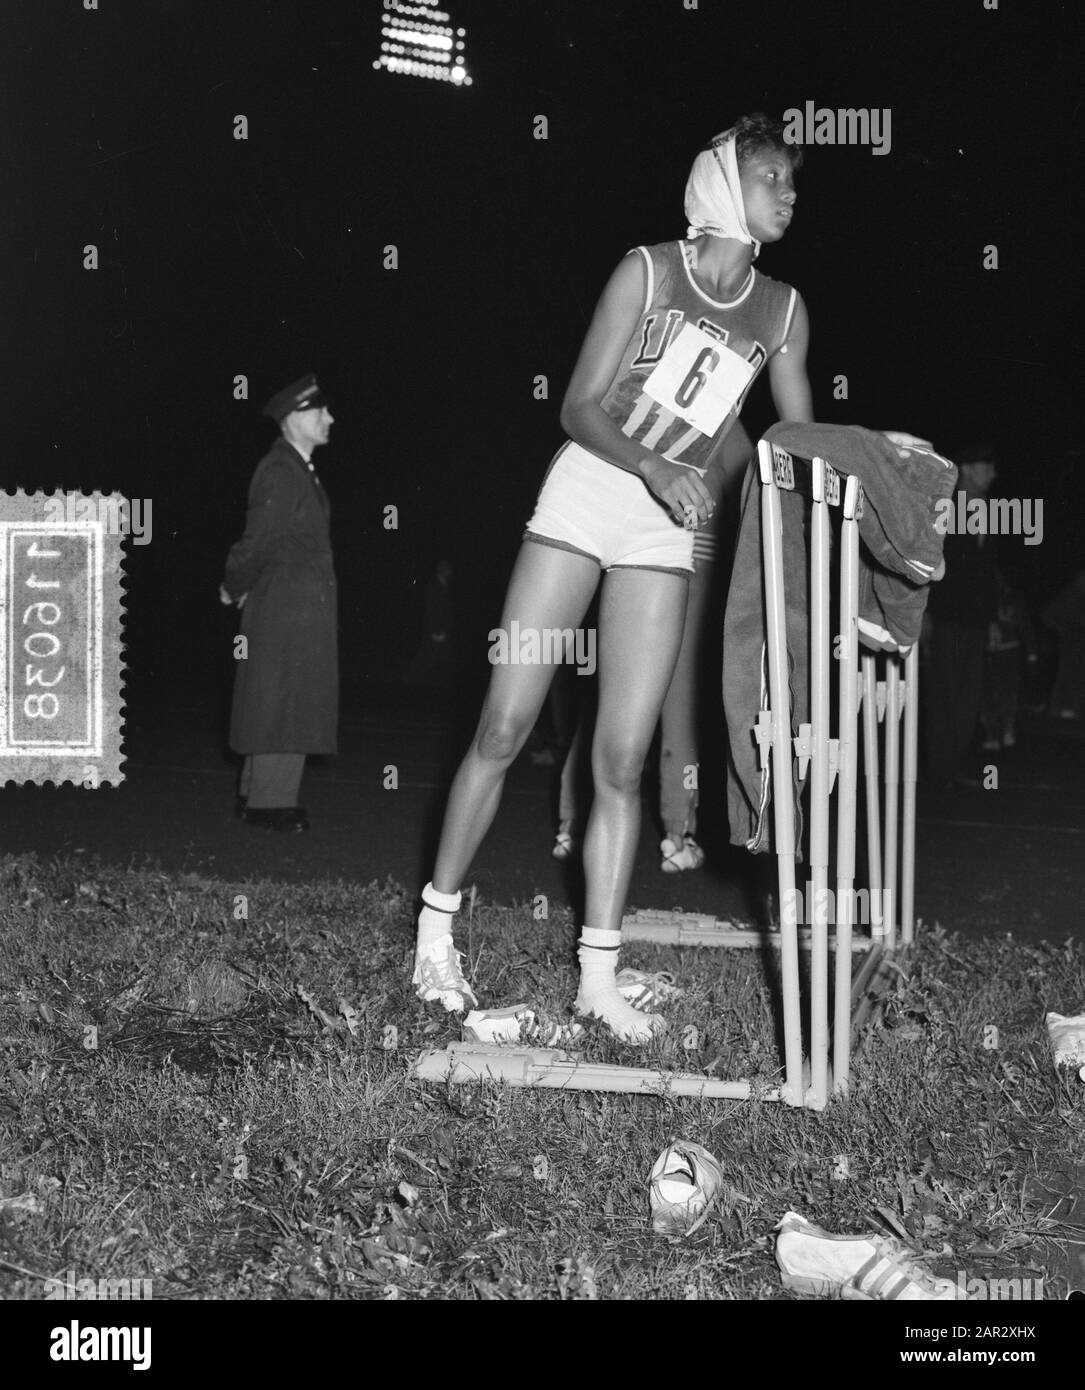 Olympic revances in stadium Amsterdam, Wilma Rudolph Date: September 15, 1960 Location: Amsterdam, Noord-Holland Keywords: athletics Personal name: Wilma Rudolph Stock Photo